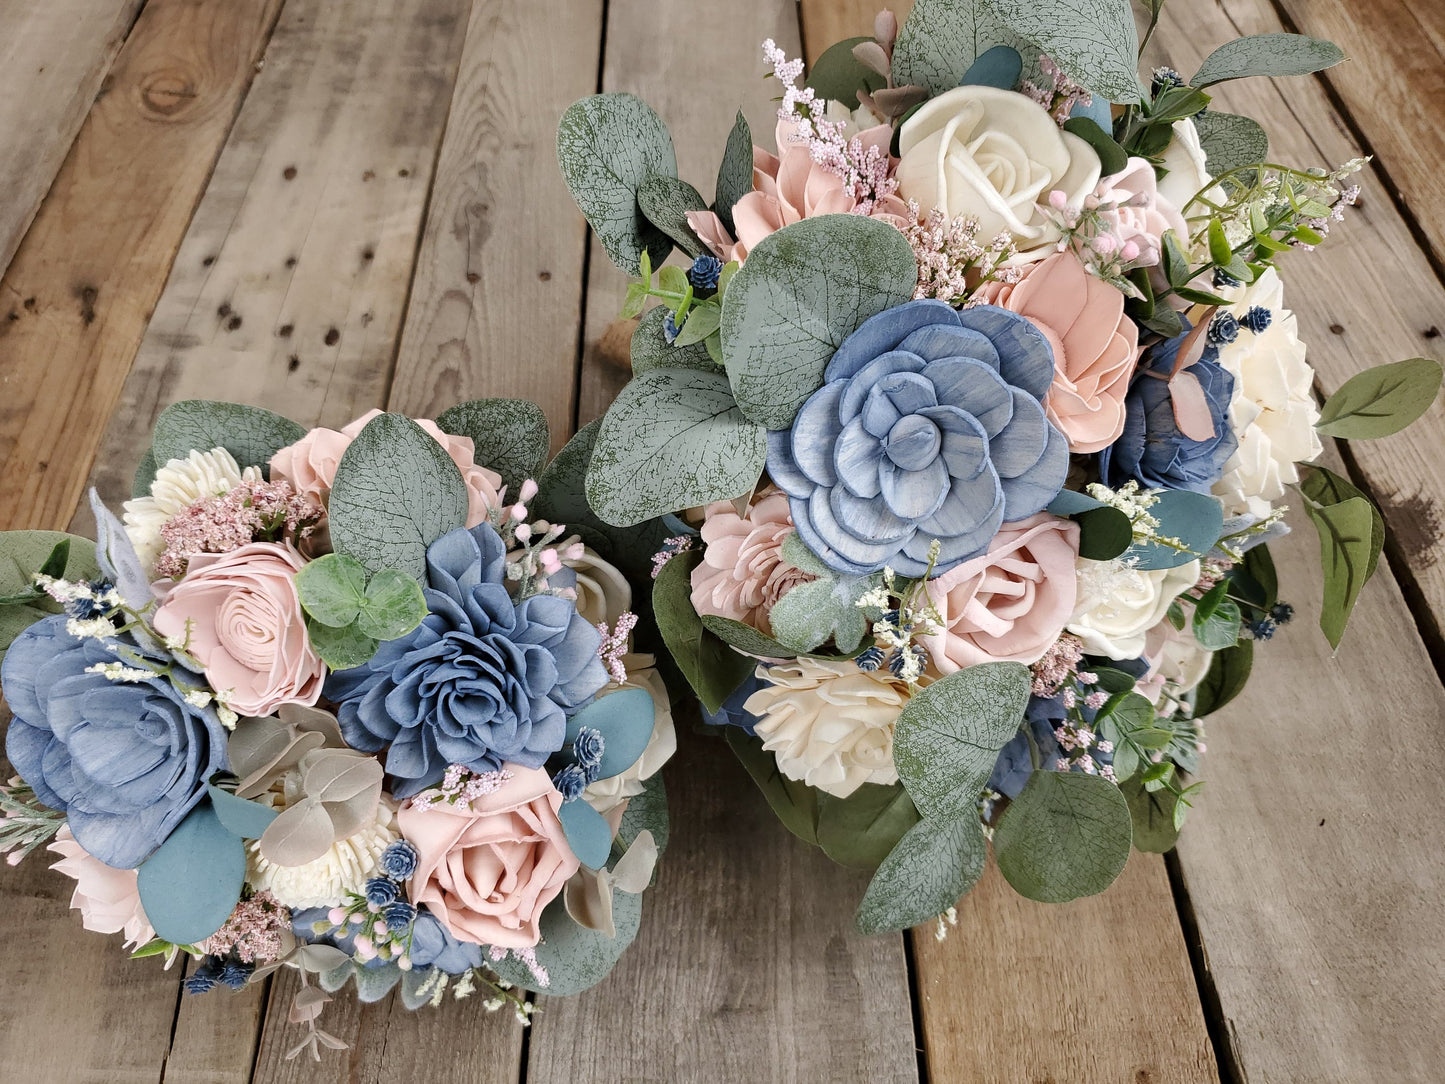 Wood Flower Bouquet, Dusty Blue and Pink Wedding Bouquet, Slate Blue Bridal Flowers, Wood Flowers Bridal Bouquet